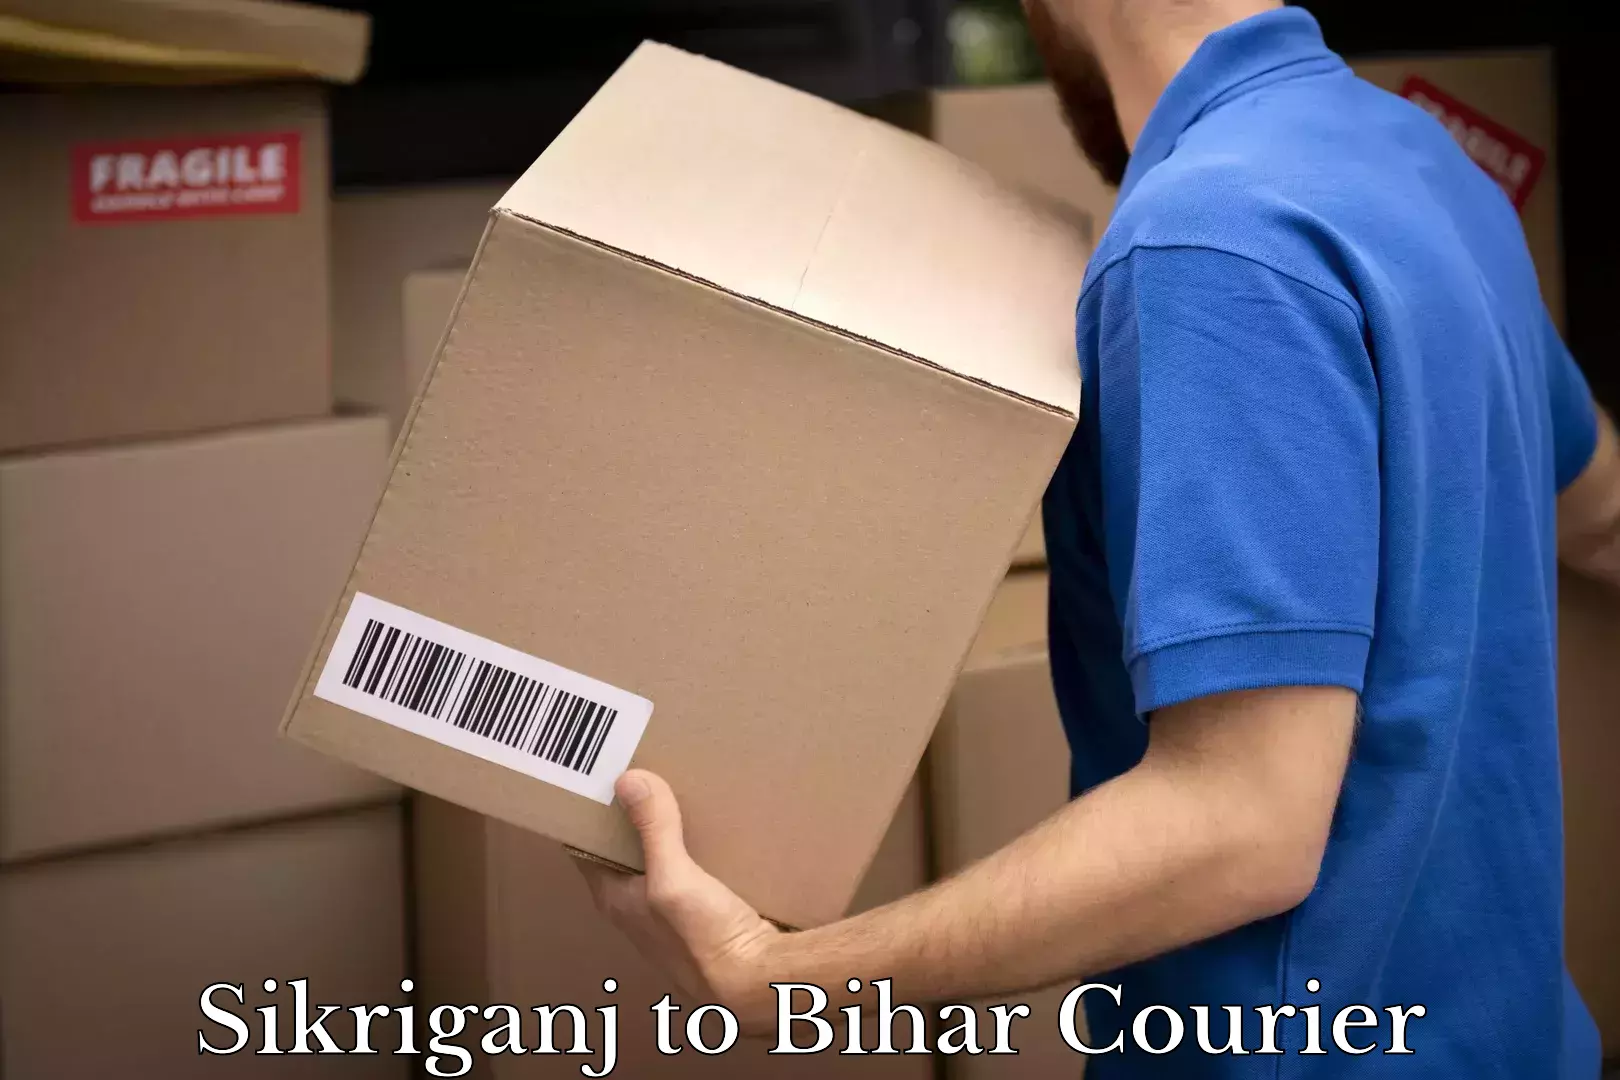 Multi-national courier services Sikriganj to Bihar